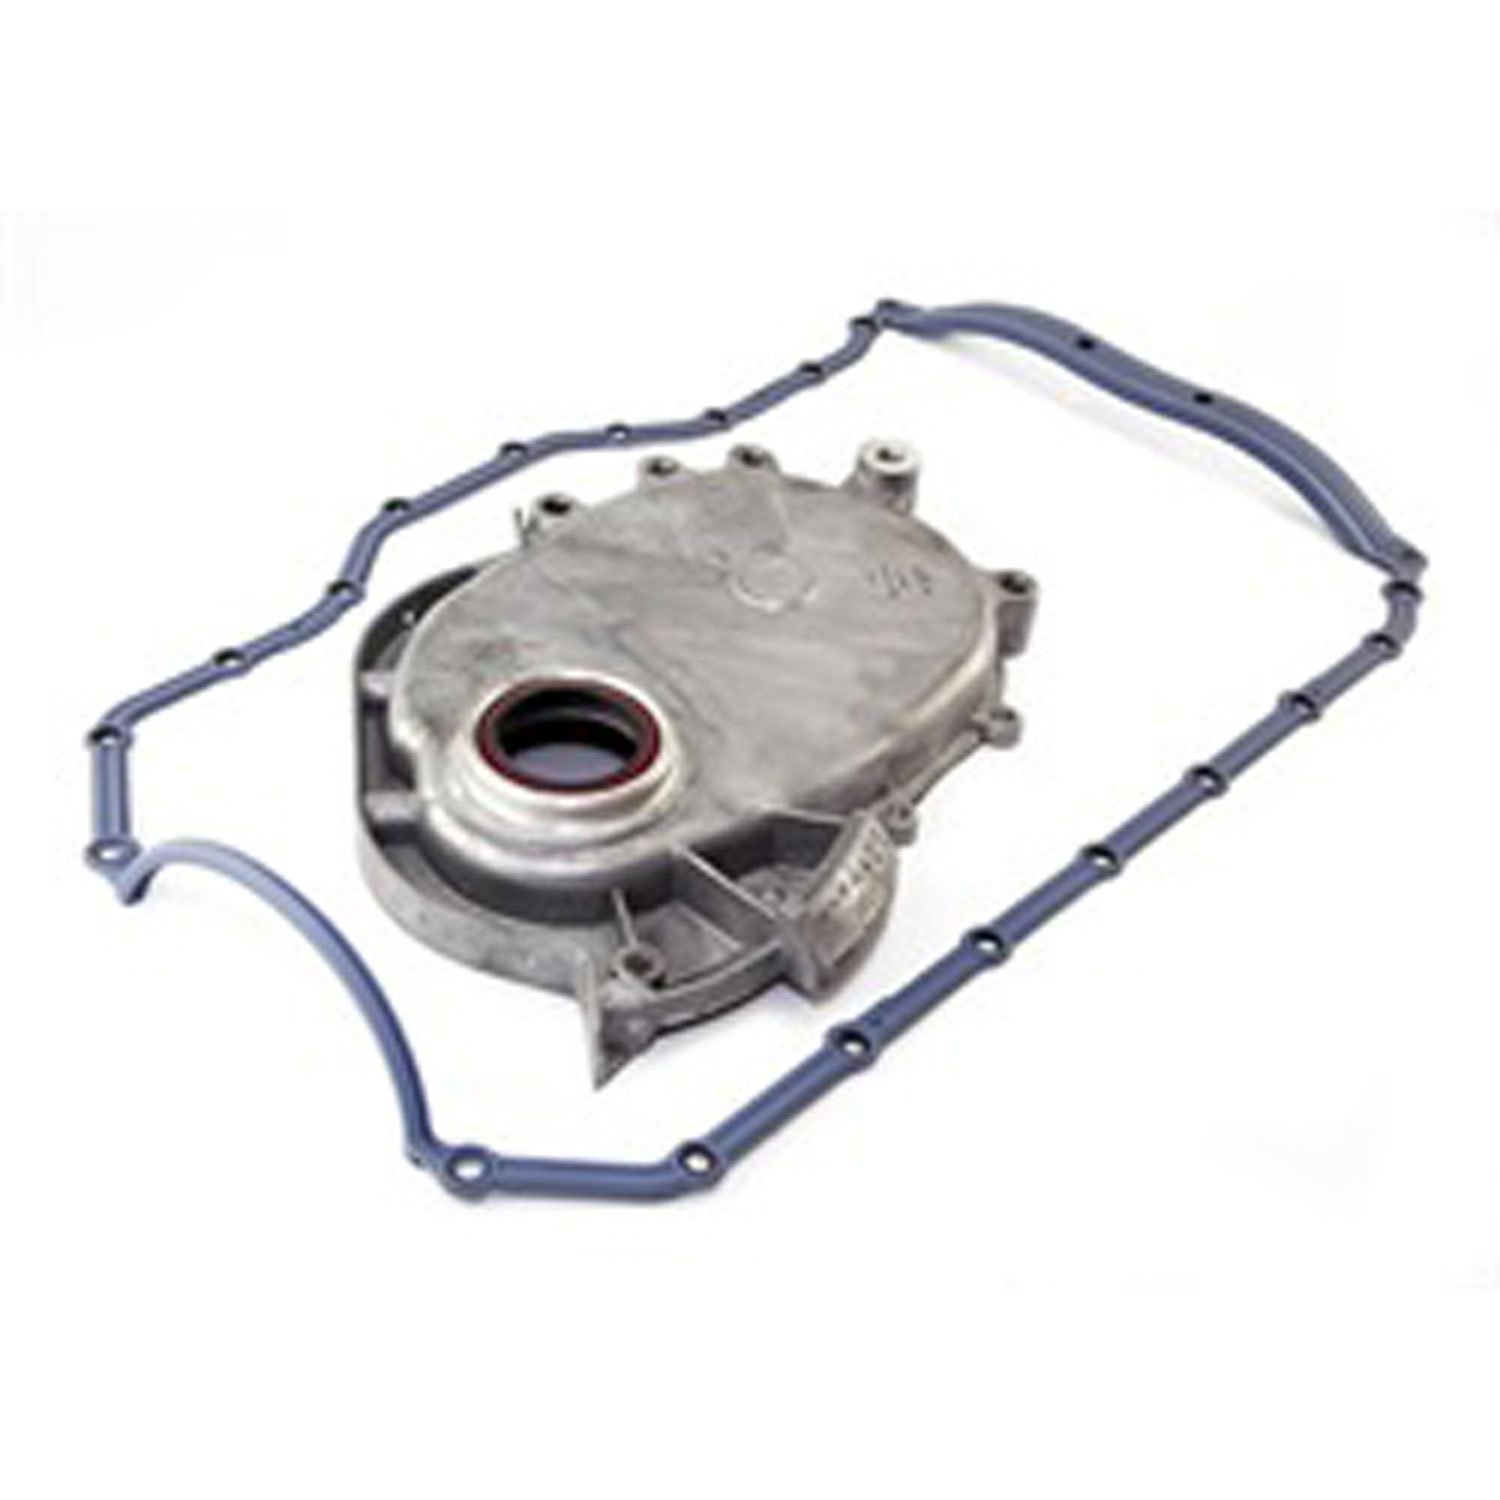 This timing chain cover kit from Rugged Ridge fits 94-01 Jeep Cherokees and 94-02 Wrangler with a 2.5 liter engine.